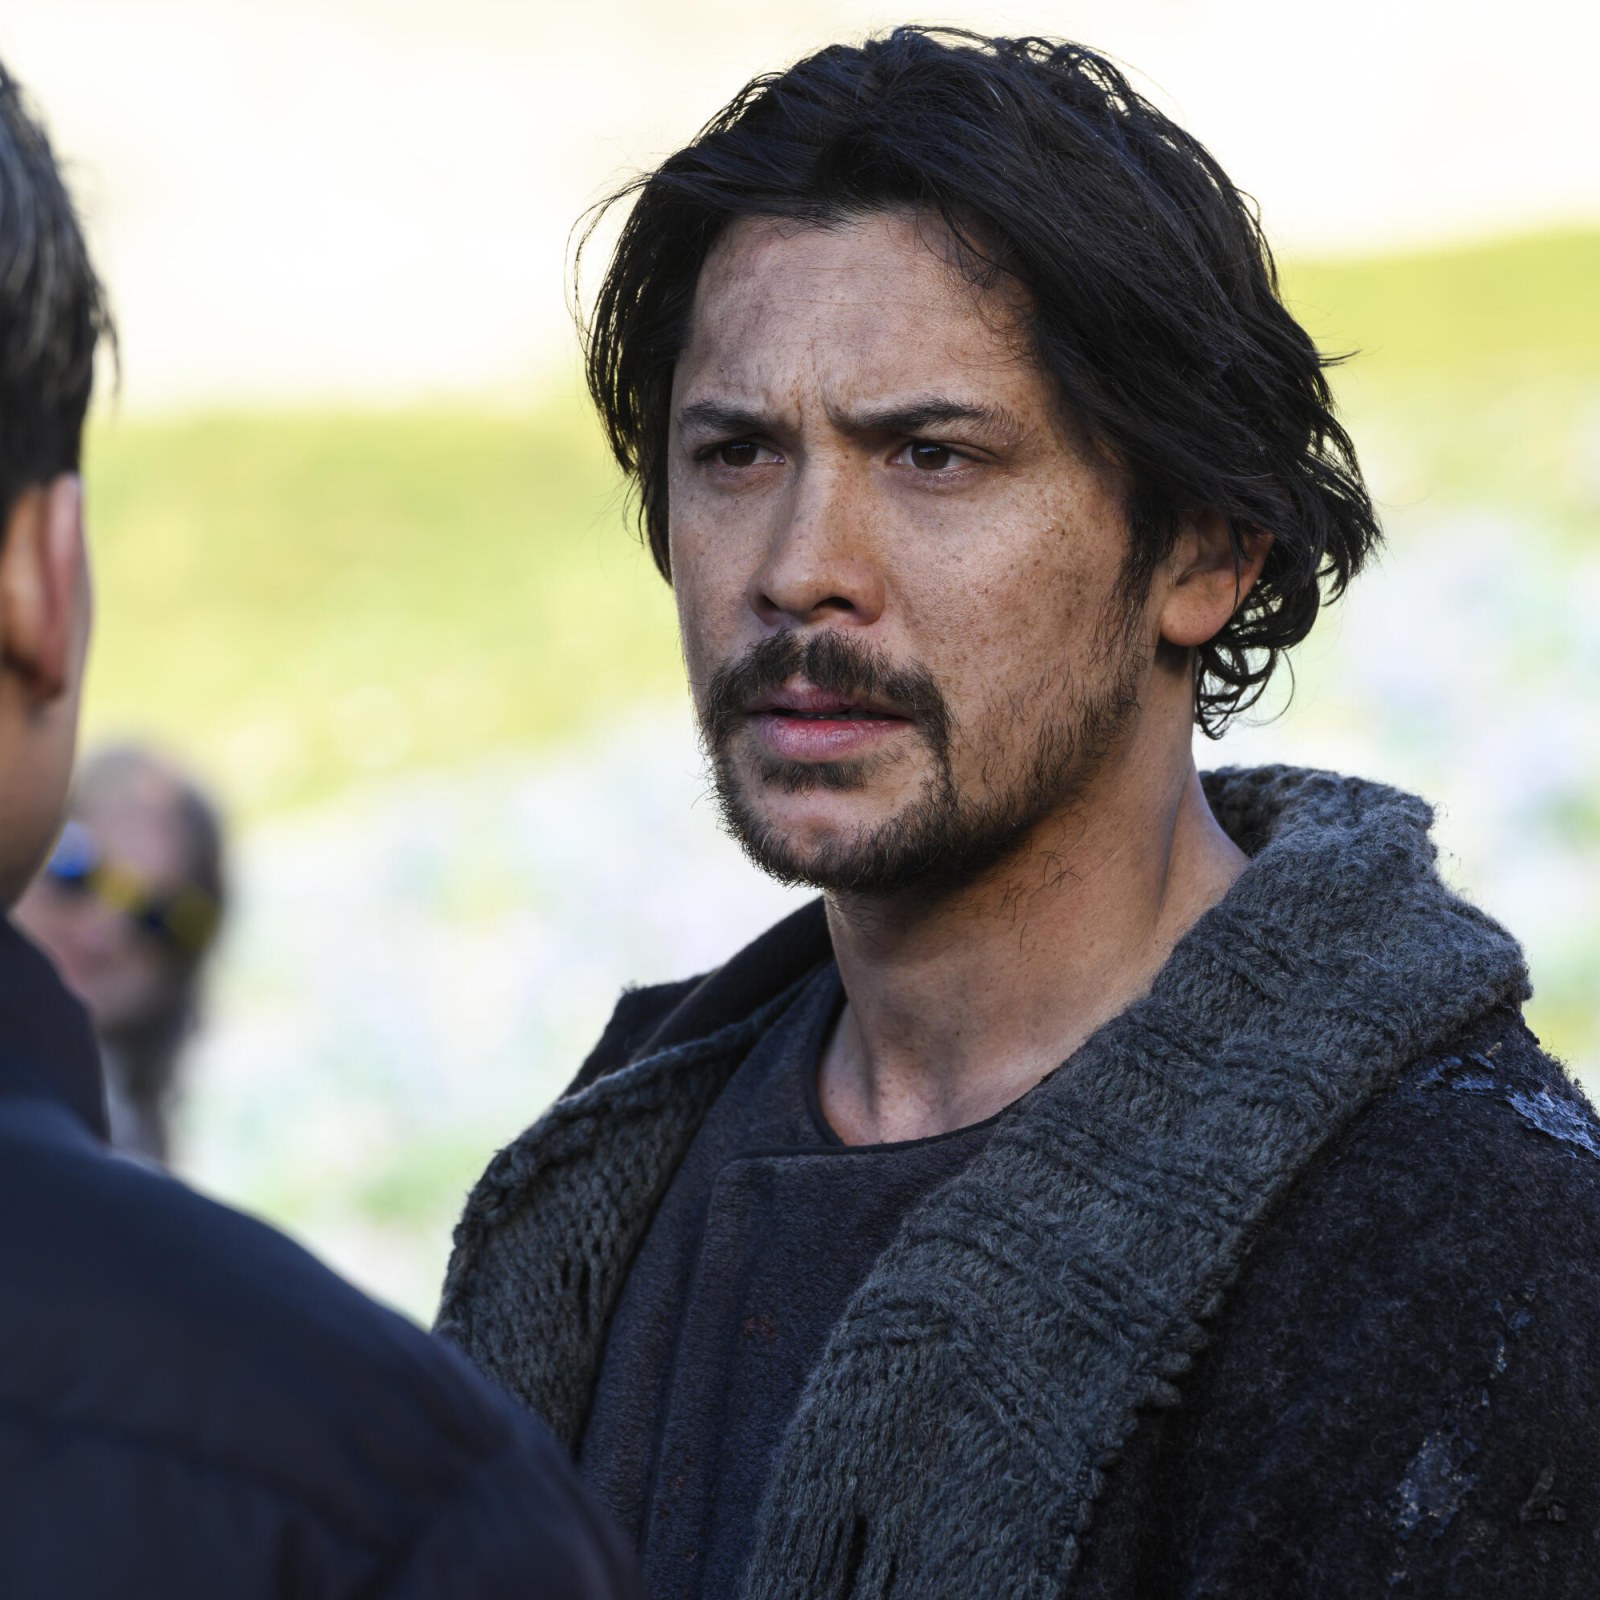 The 100': Bellamy Actor Reacts After His Is Killed Off